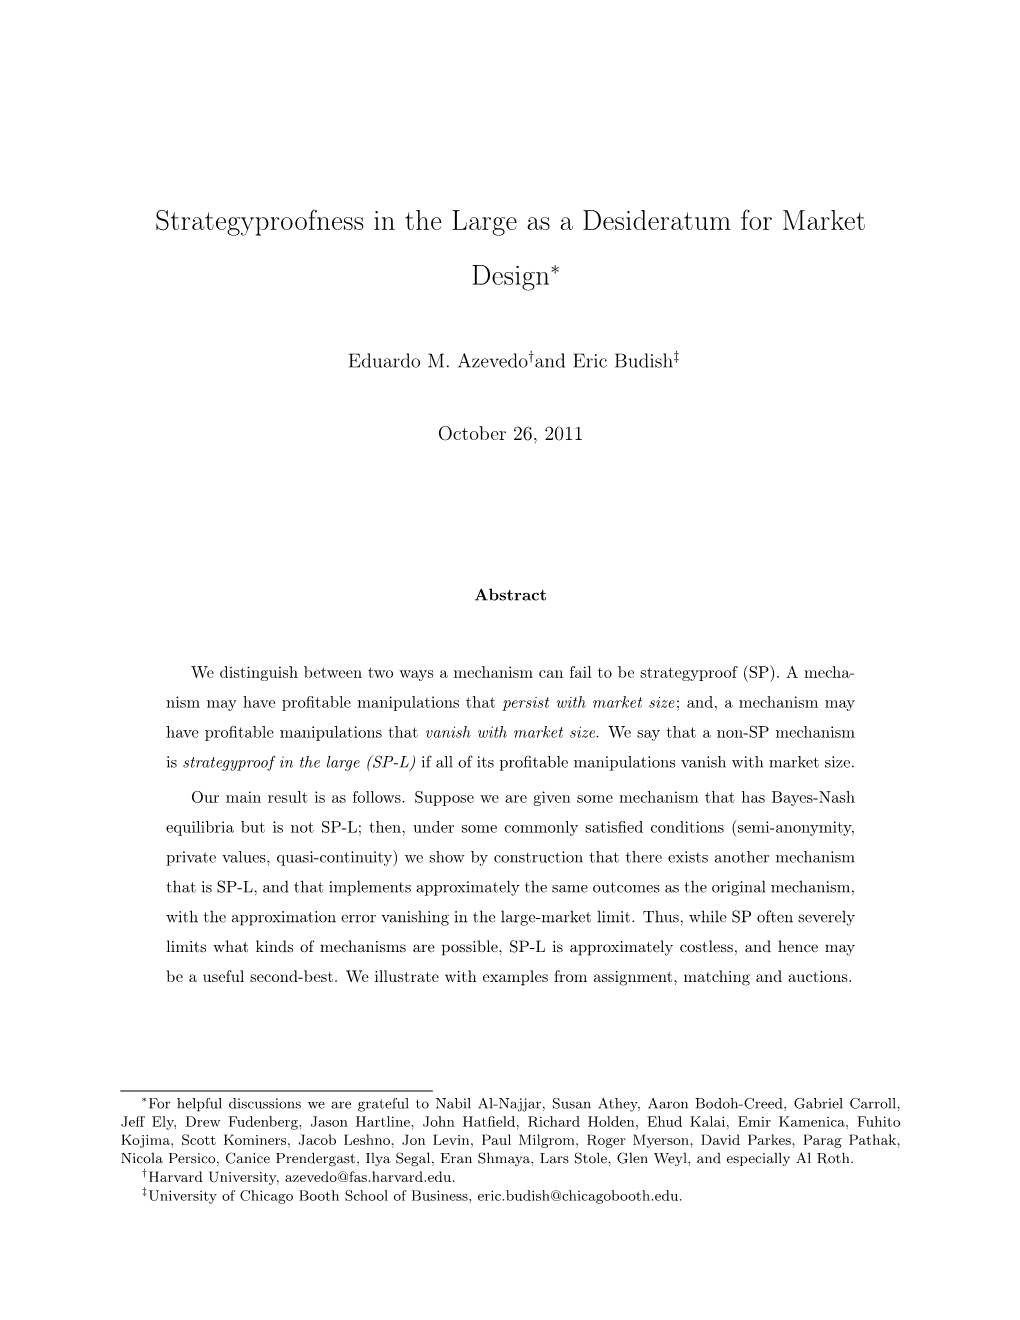 Strategyproofness in the Large As a Desideratum for Market Design∗